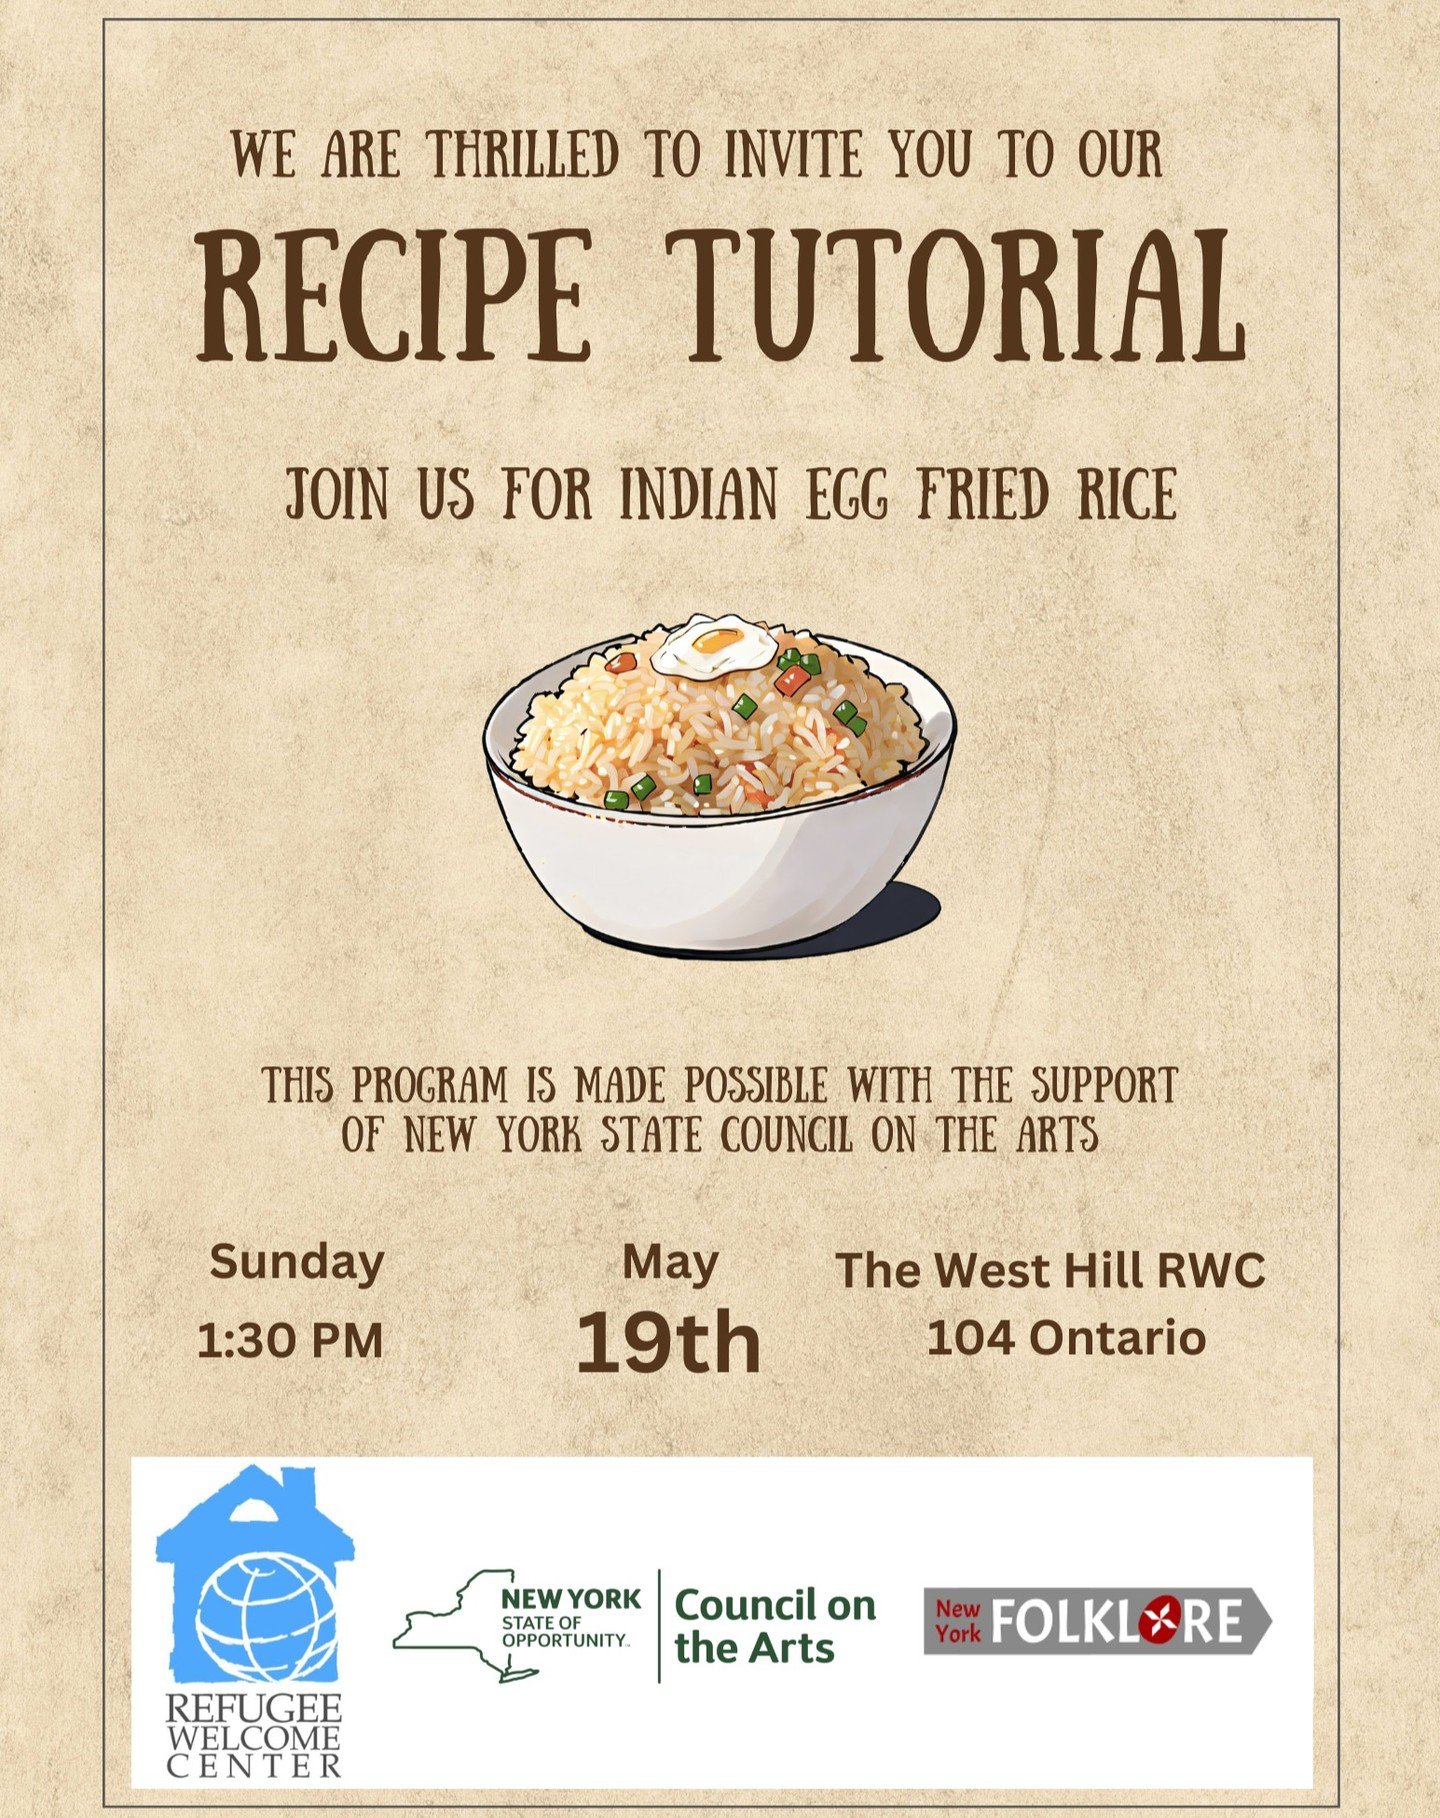 Come join us on Sunday, May 19th, for a delicious recipe tutorial: let's learn how to make Indian Egg Fried Rice 🍳🍚

May 19th, 1:30pm !!
@nyfolklore @nyscouncilonthearts